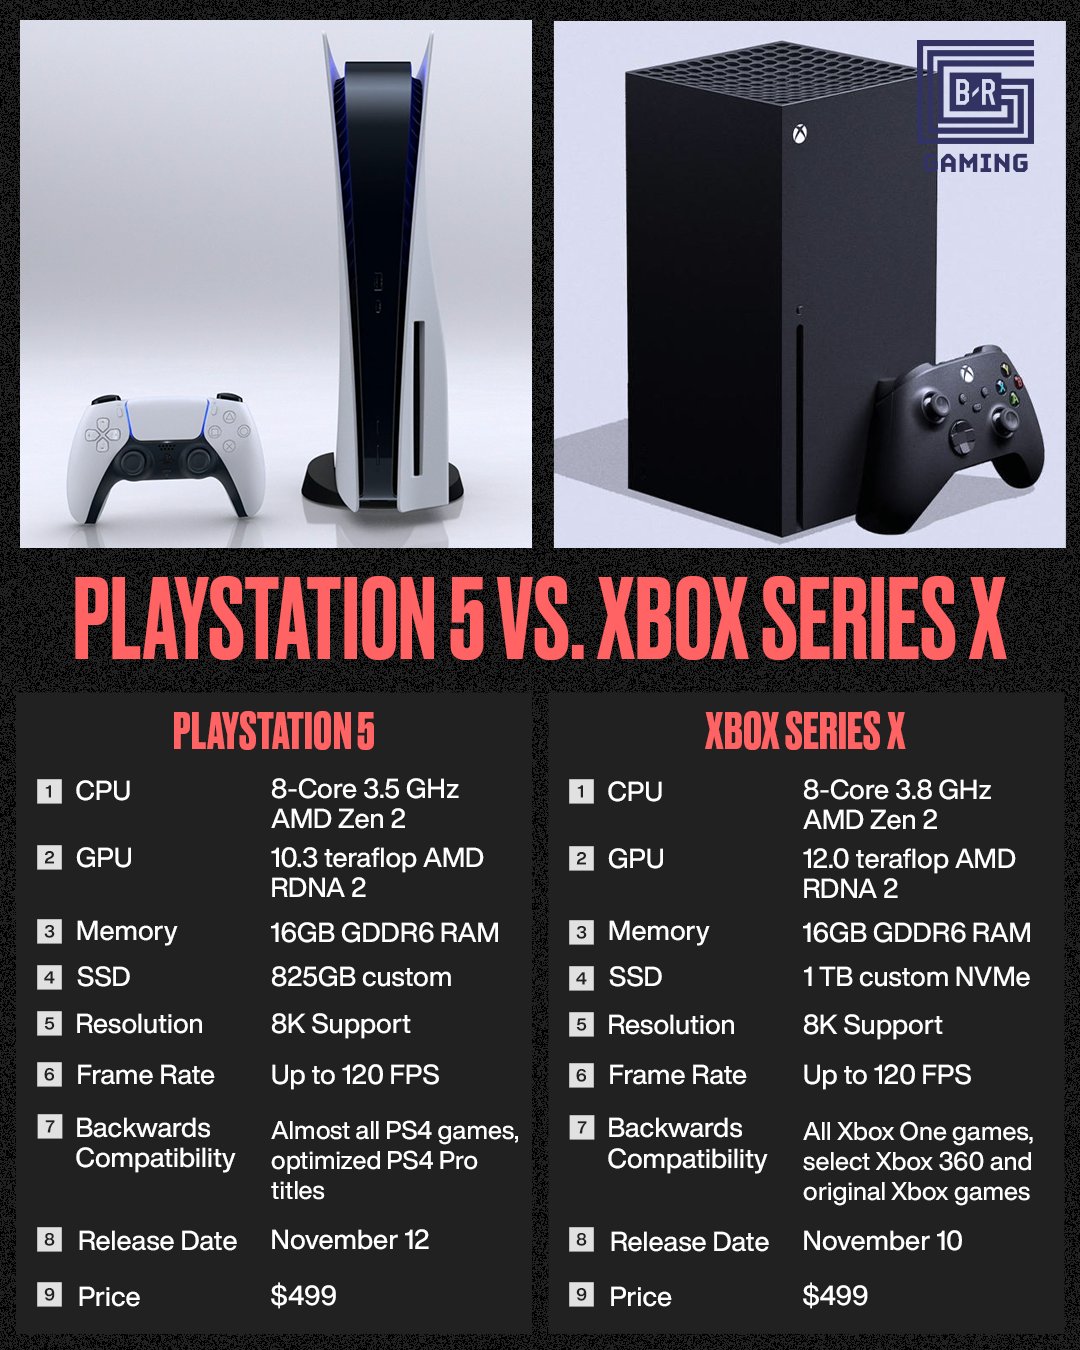 Springplank tegel scheuren B/R Gaming on Twitter: "PS5 vs. Xbox Series X 🤔 What are you getting?  https://t.co/srMdmELxBs" / Twitter